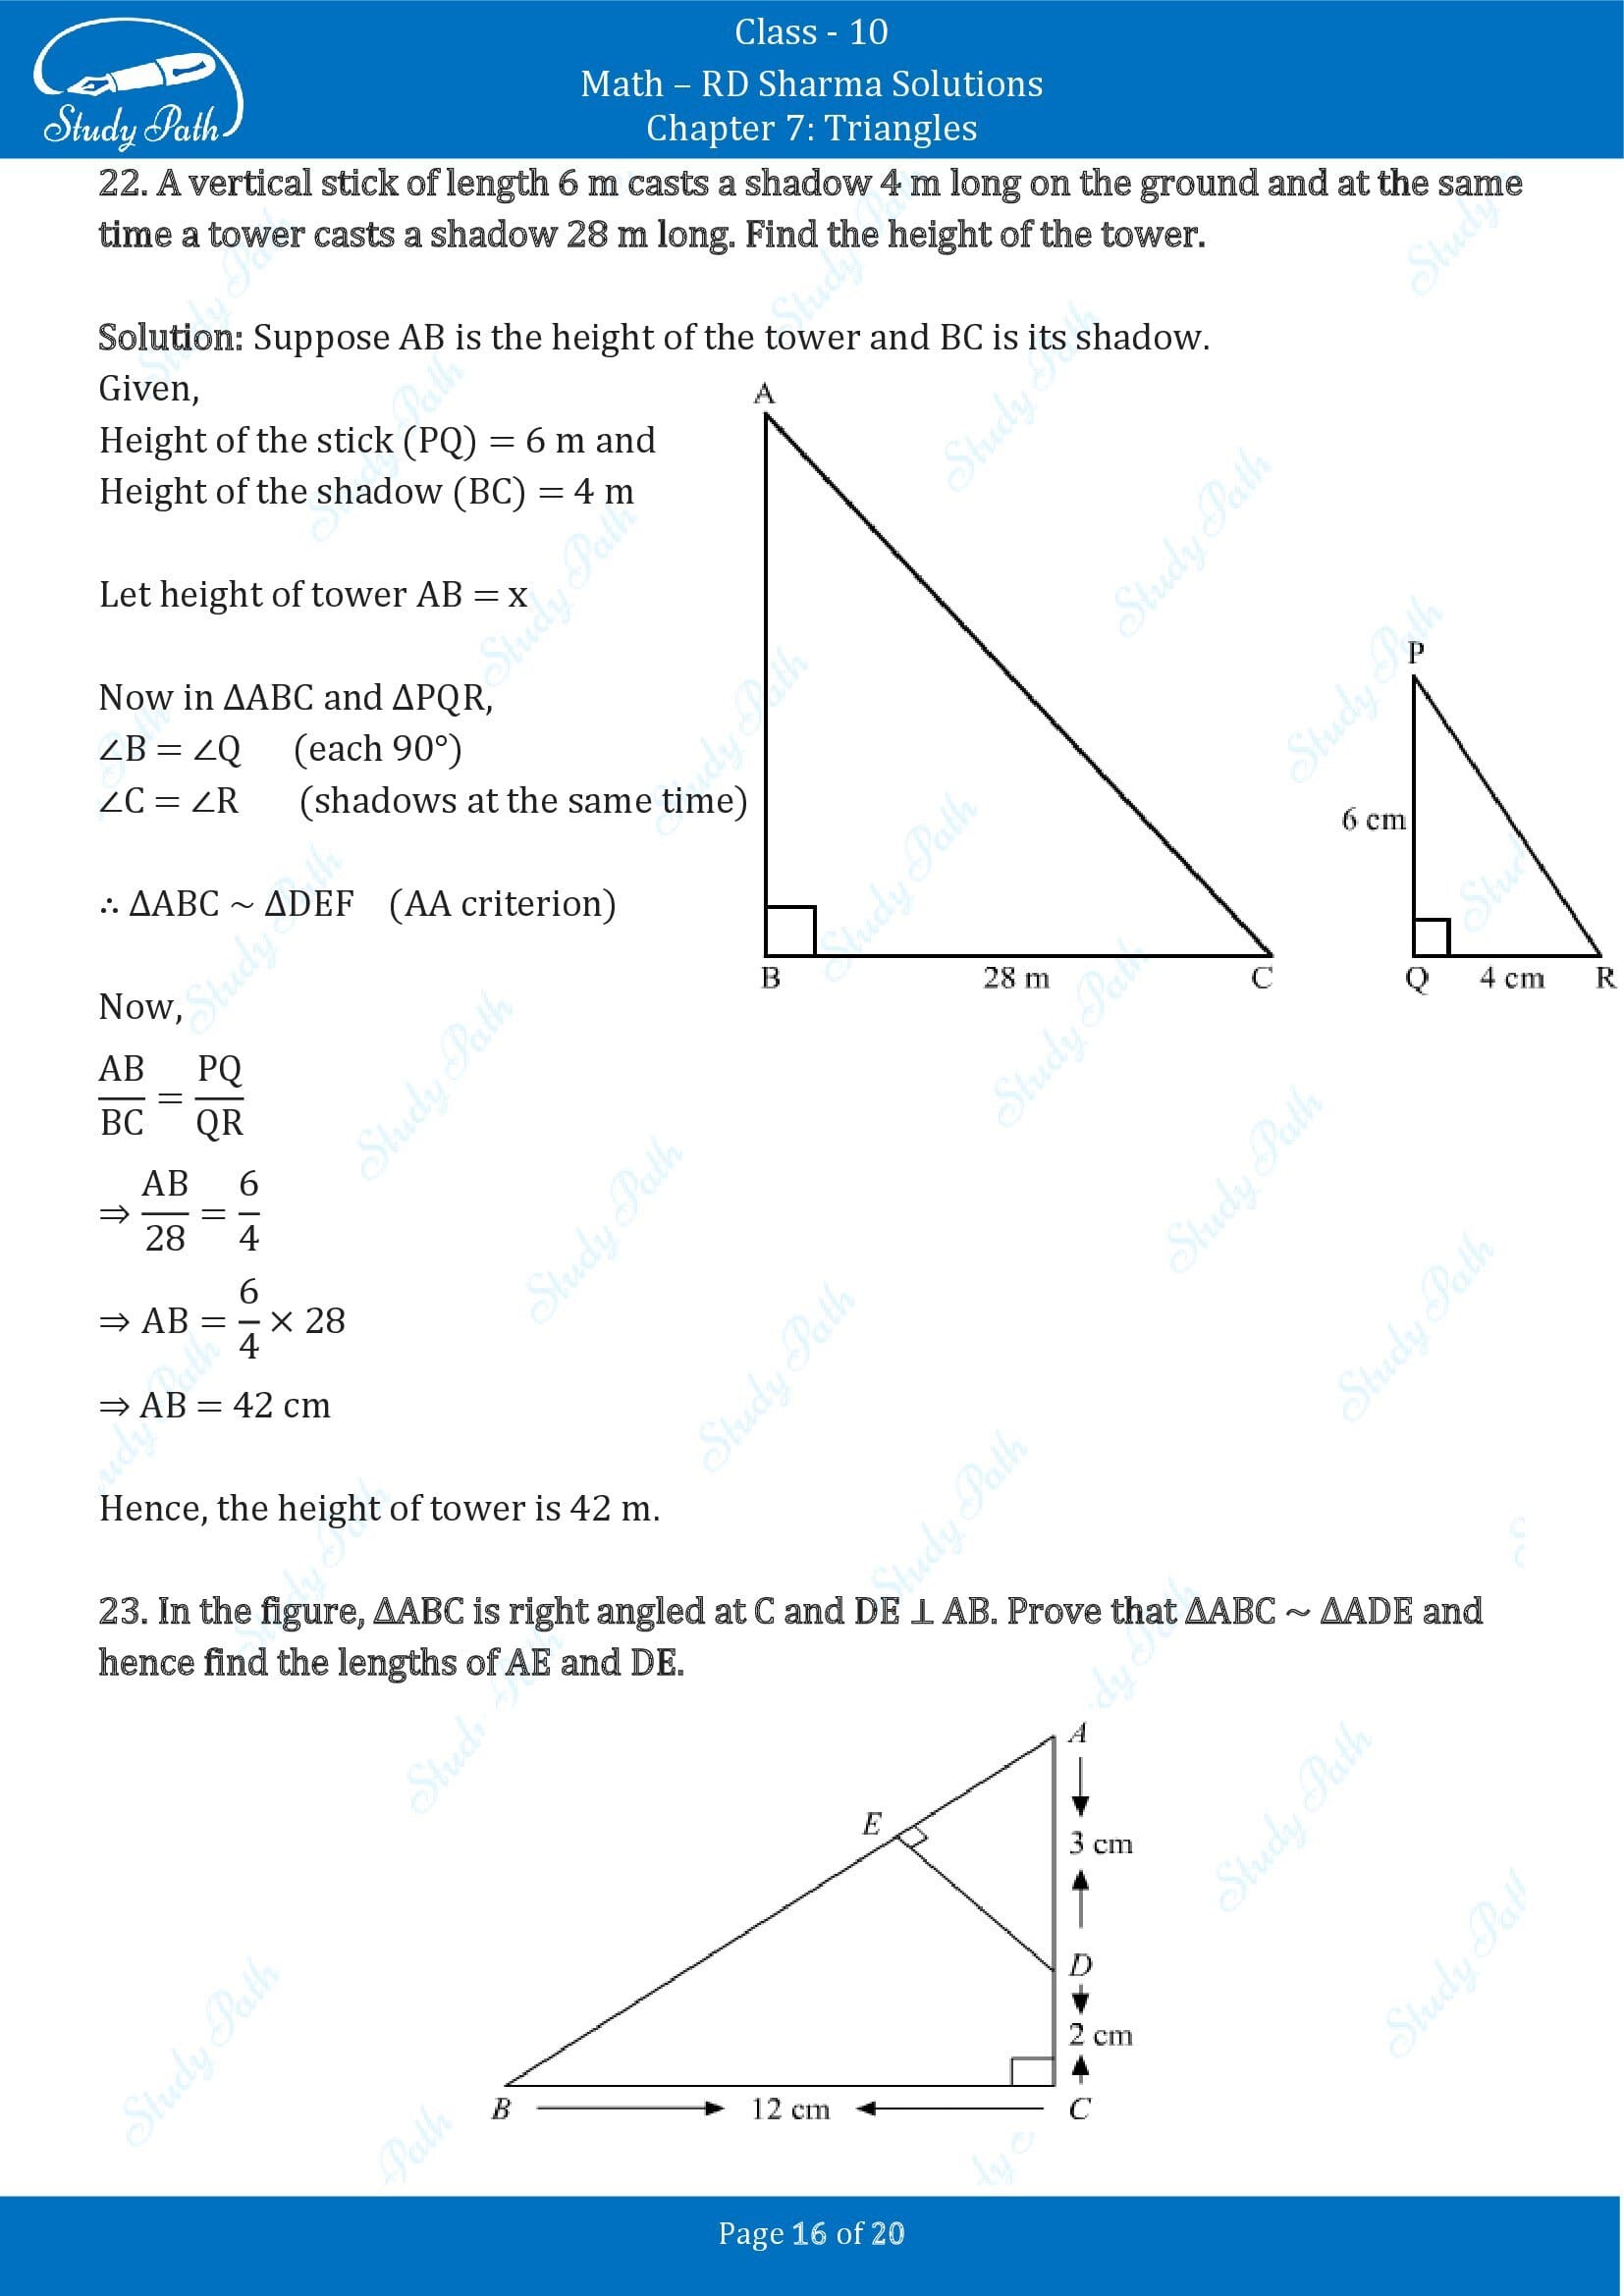 RD Sharma Solutions Class 10 Chapter 7 Triangles Exercise 7.5 00016